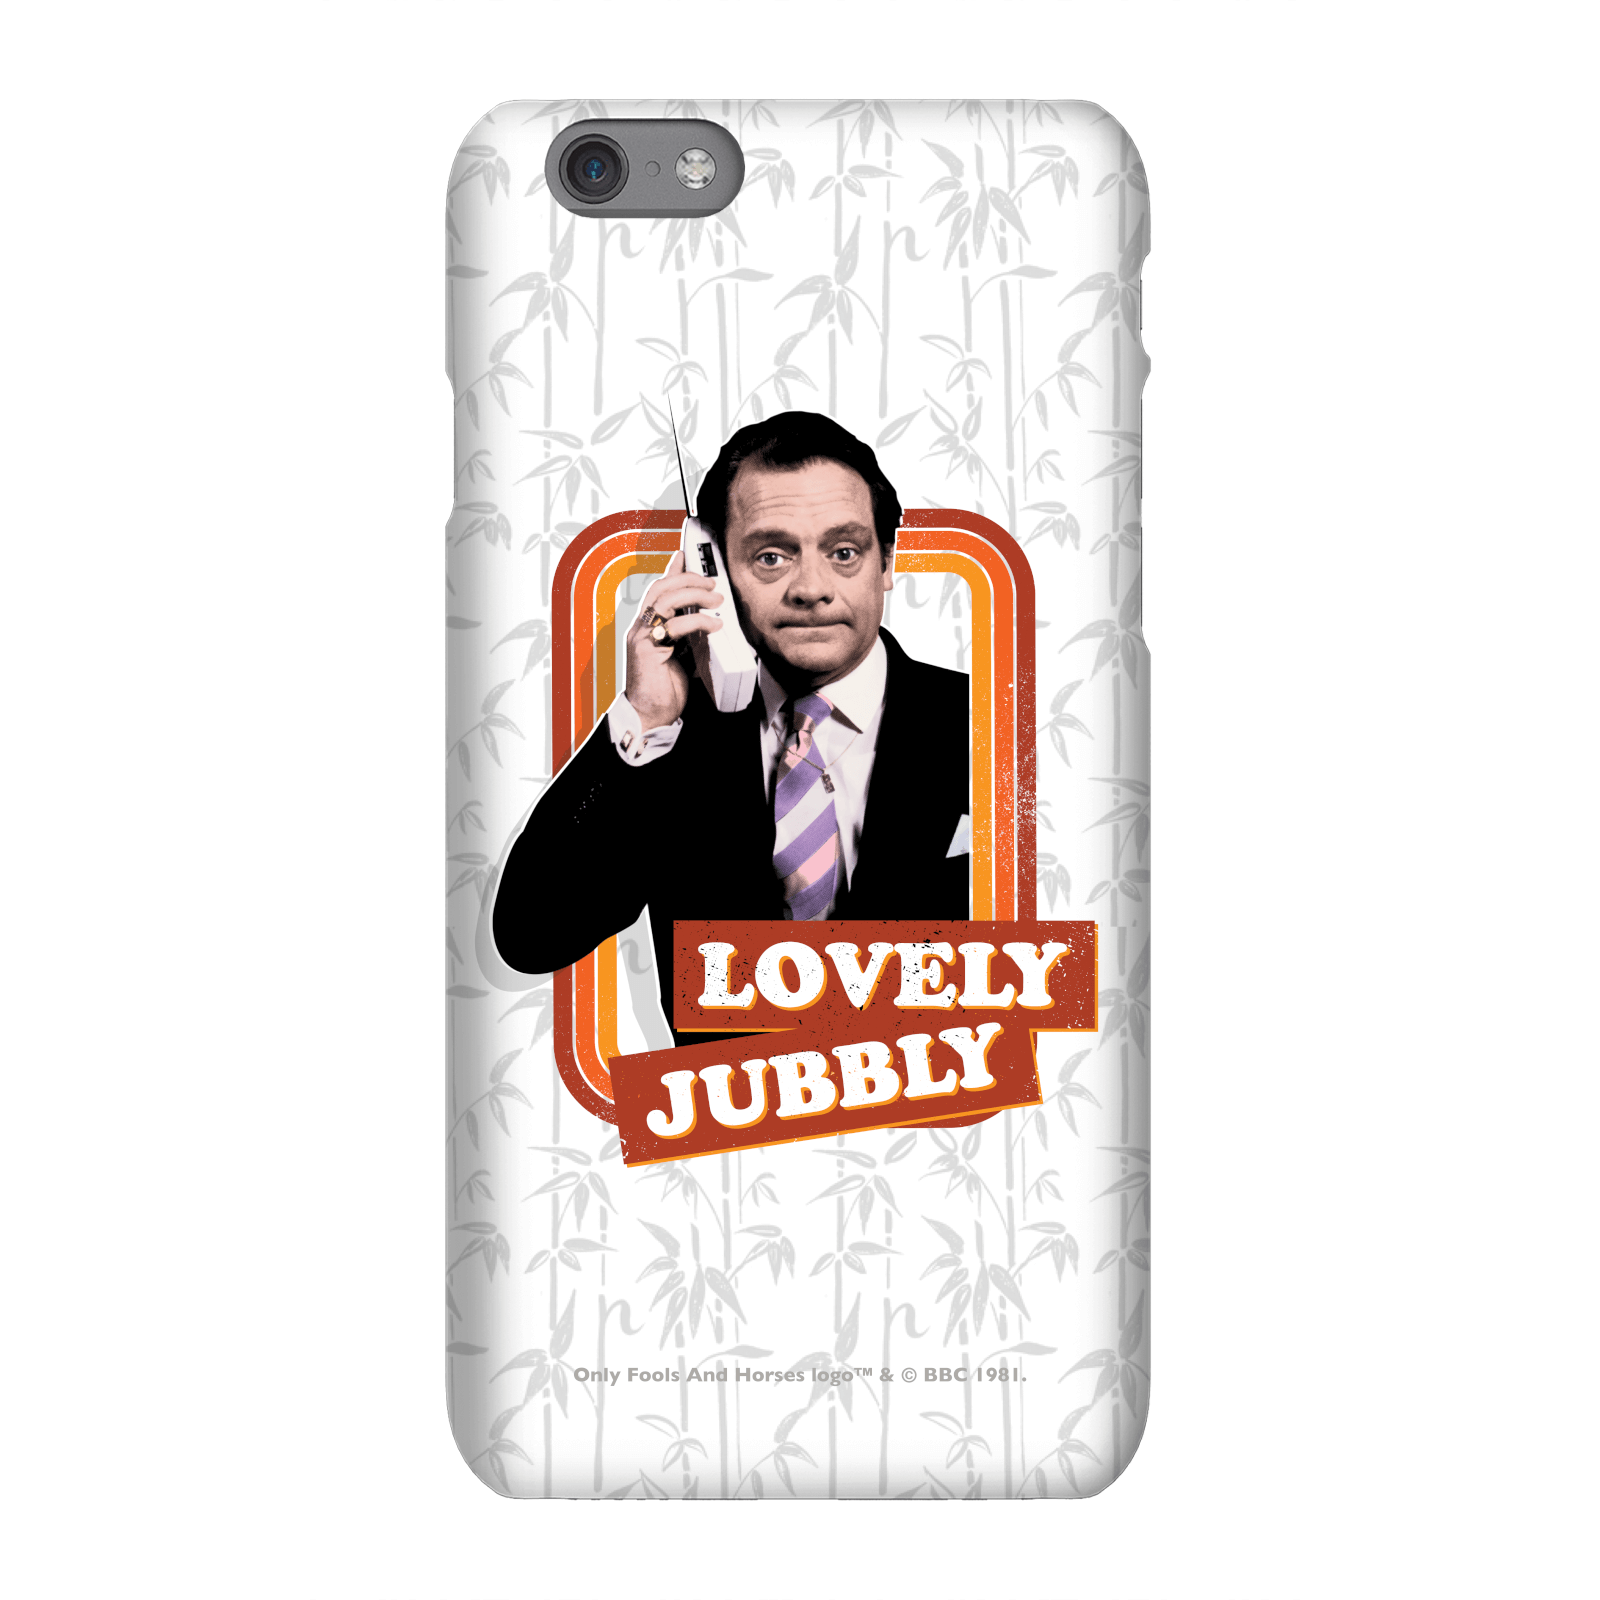 Only Fools And Horses Lovely Jubbly Phone Case for iPhone and Android - iPhone 6S - Carcasa rígida - Mate